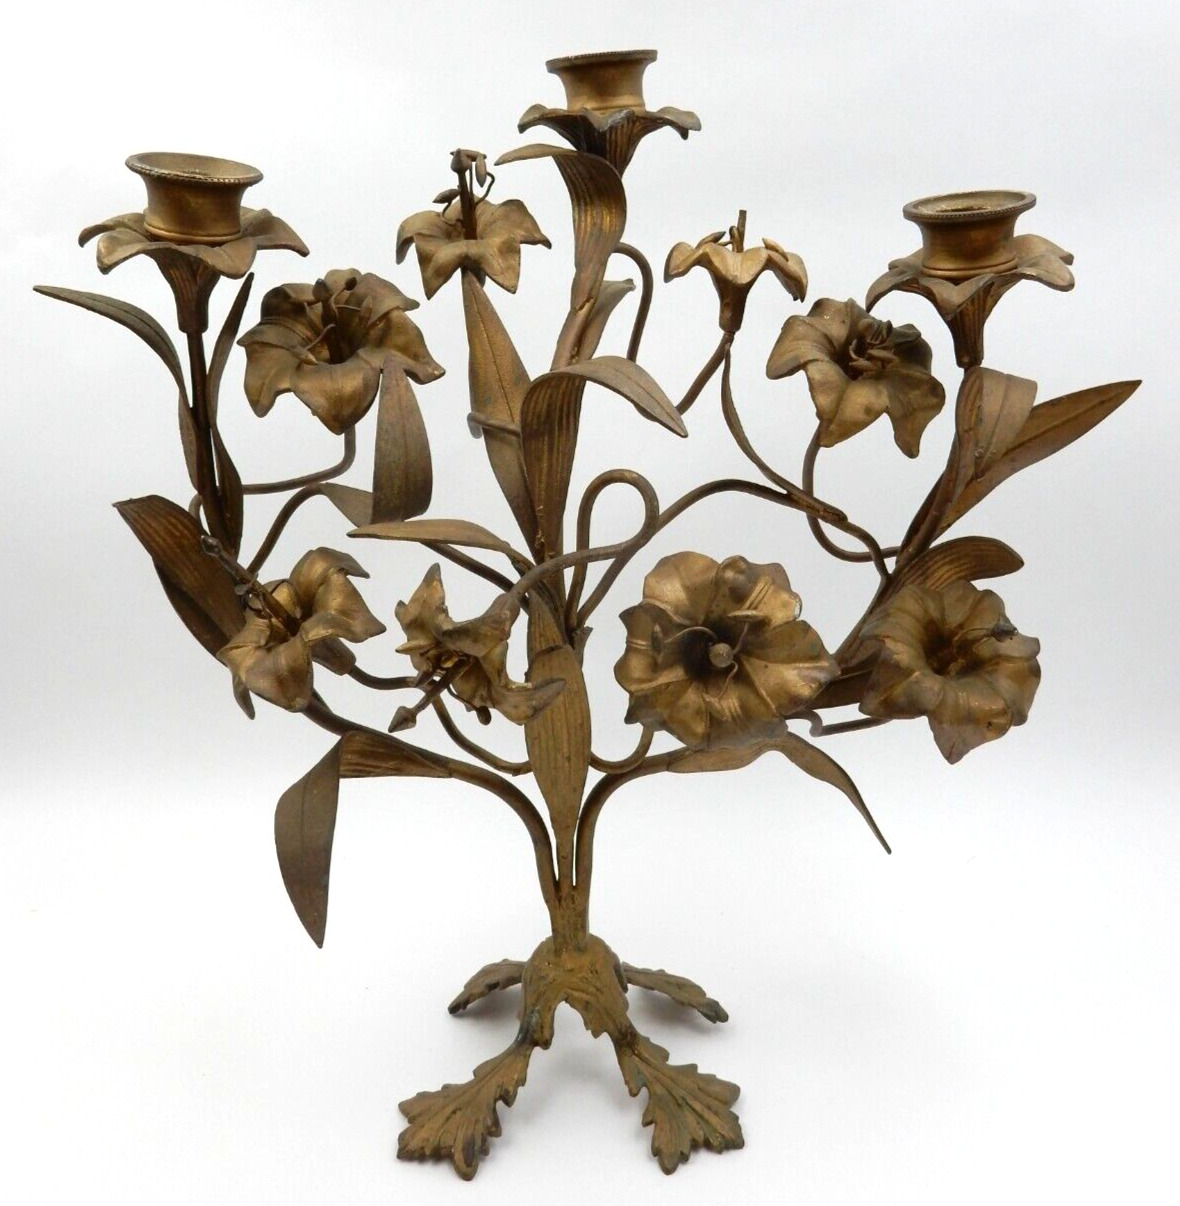 ANTIQUE FRENCH BRASS 19TH CENTURY LEAVES & FLOWERS CHURCH 3 LIGHT CANDLEABRA